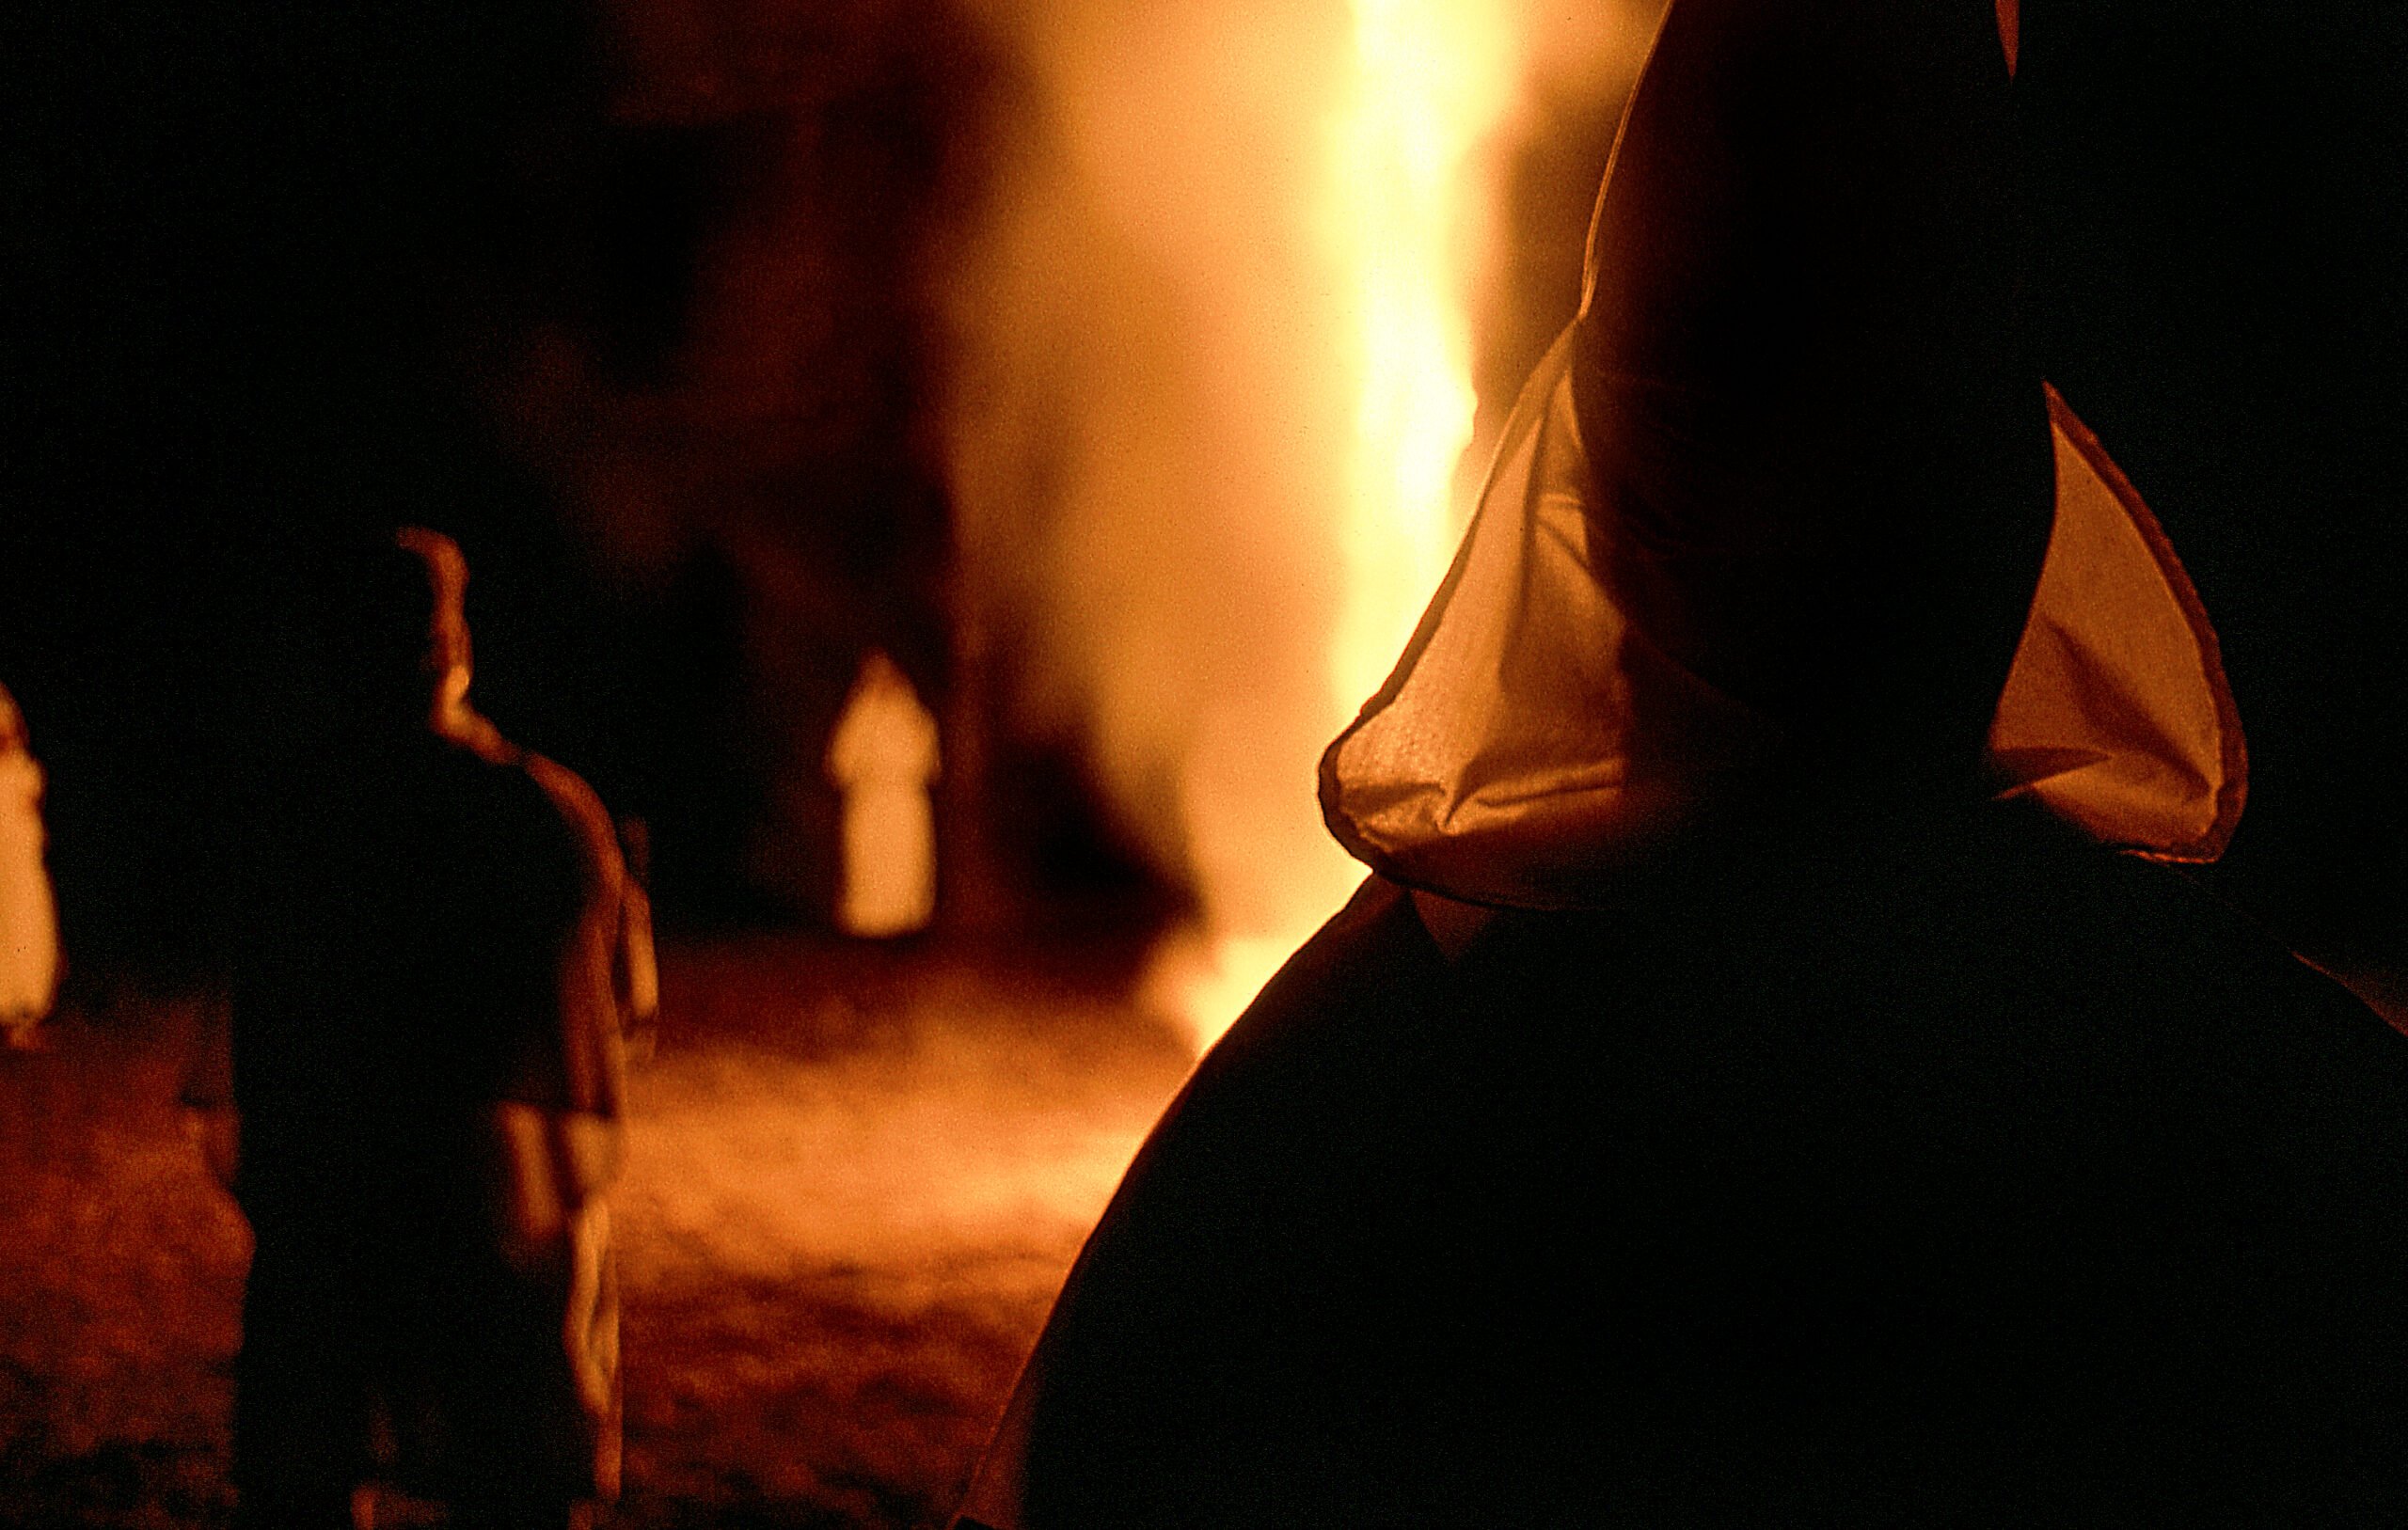 A shadowy photo of Ku Klux Klan members, silhouetted in their white robes by a burning bonfire.